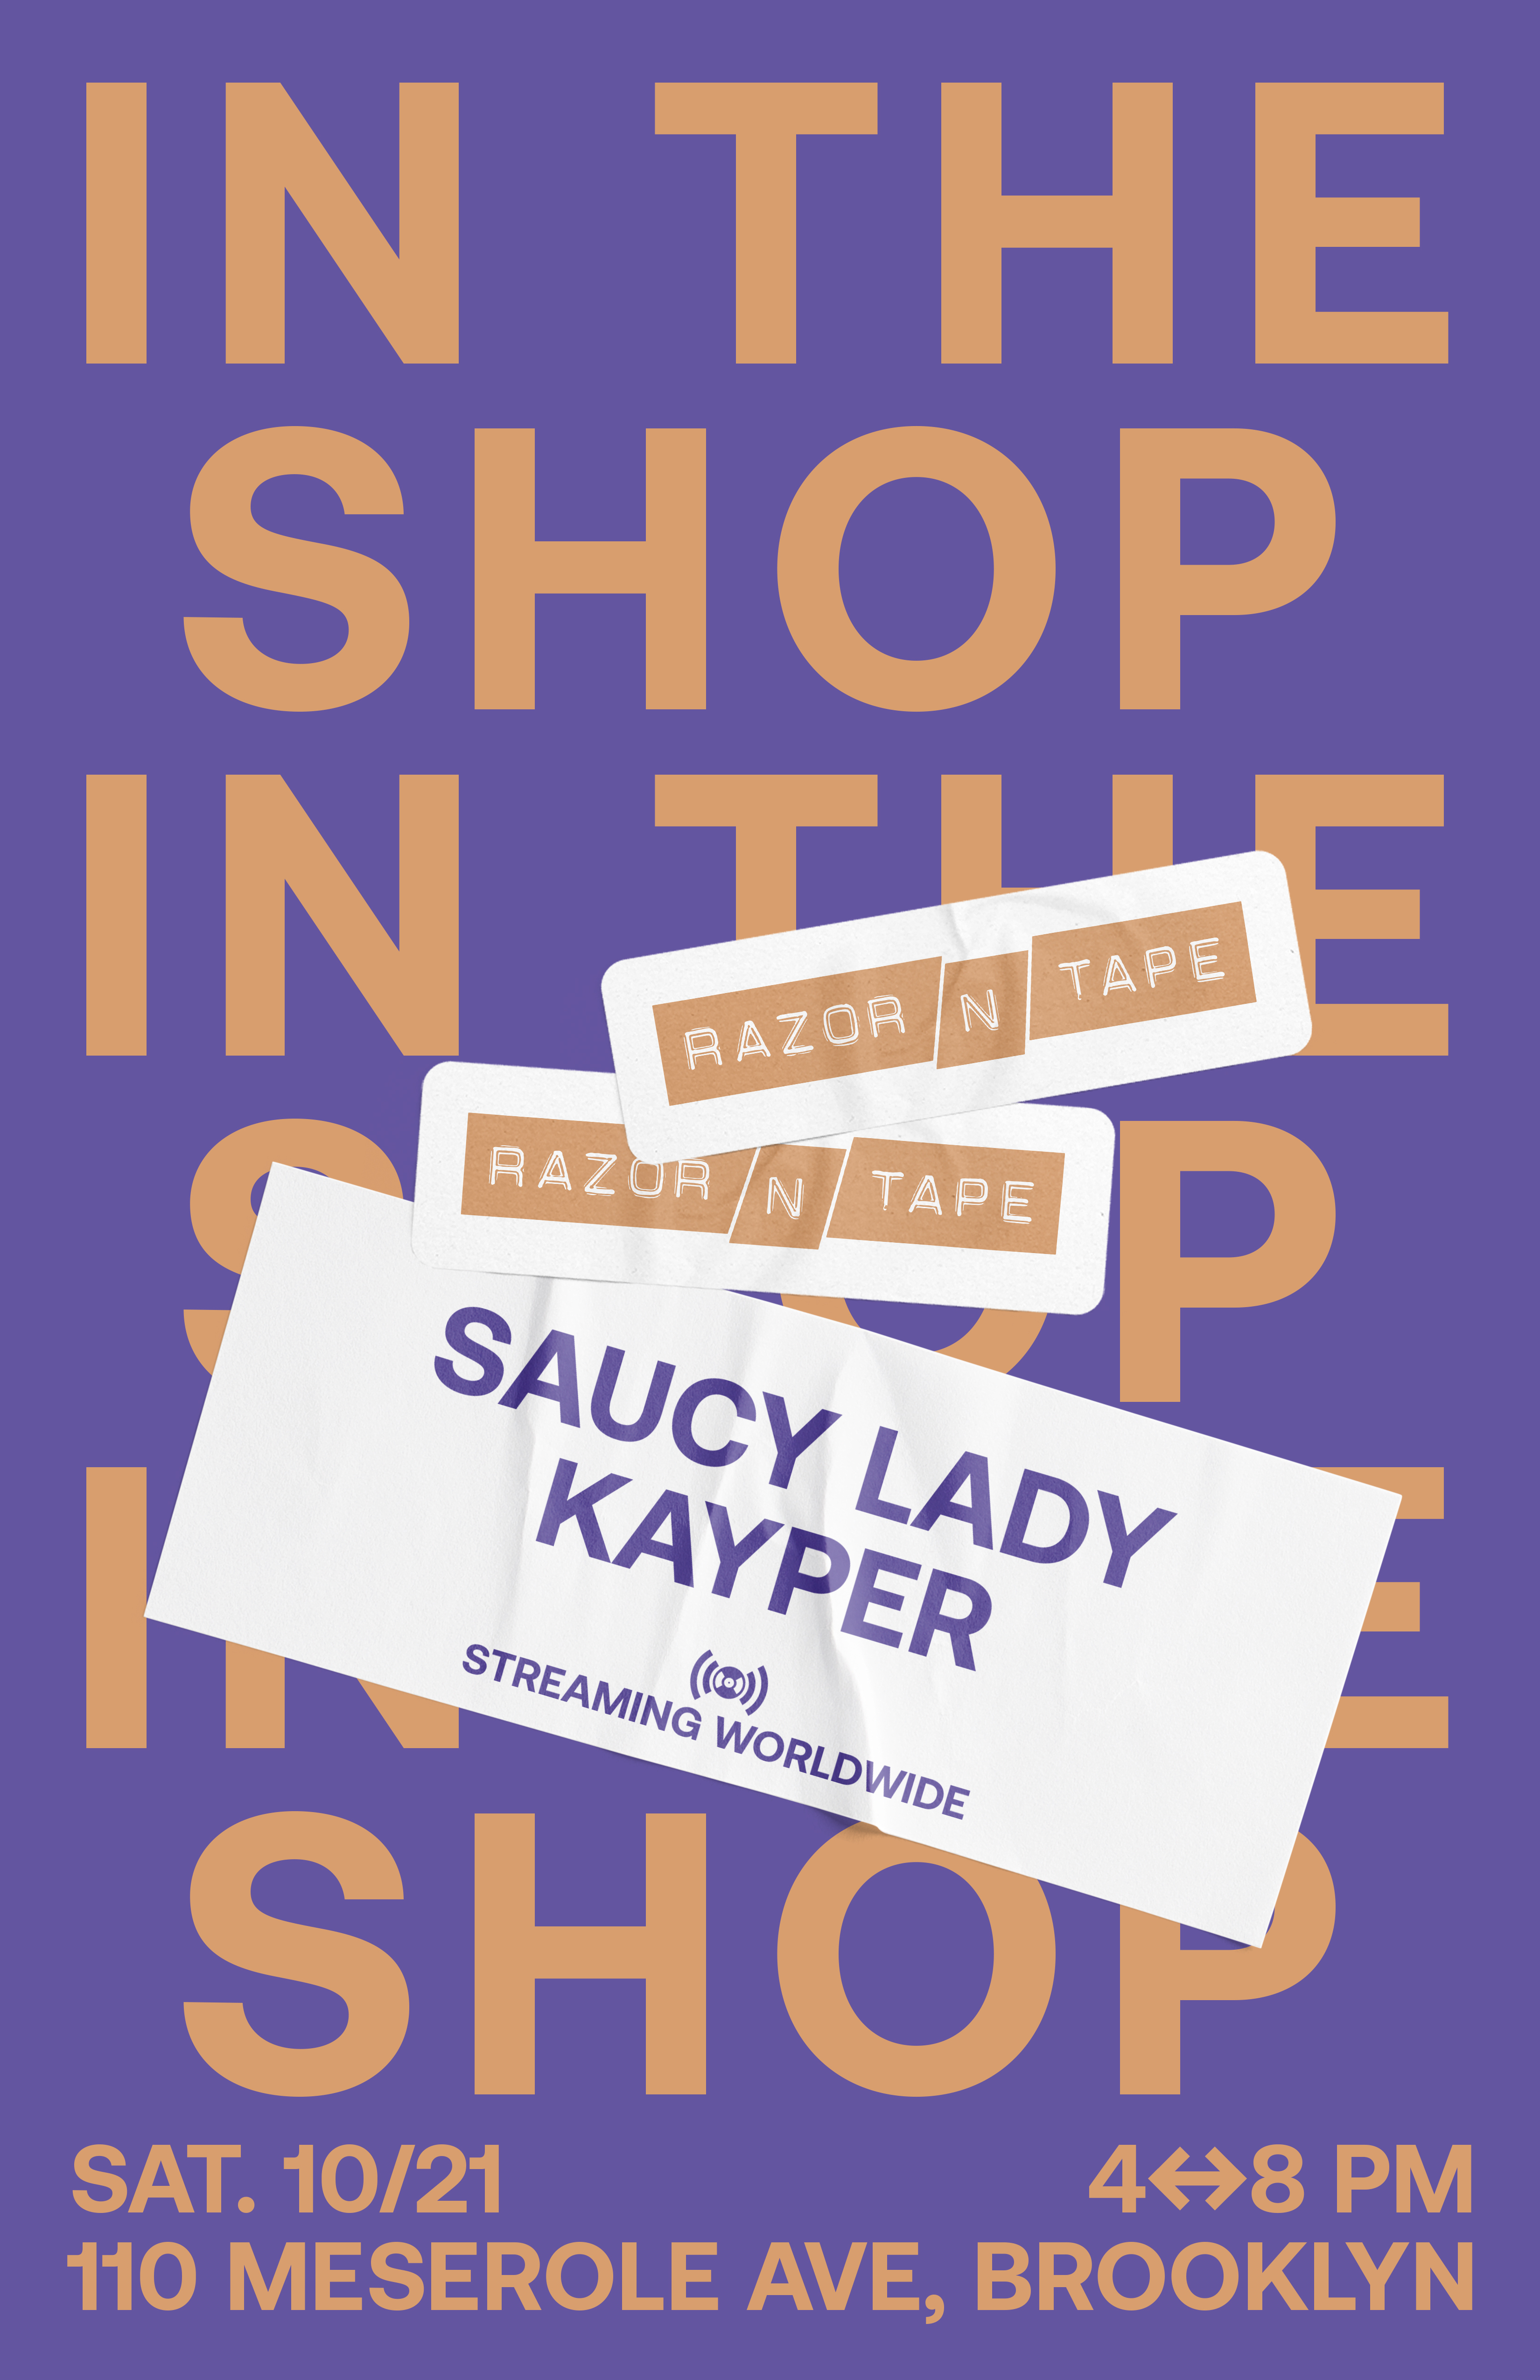 In The Shop: Saucy Lady, Kayper - フライヤー表